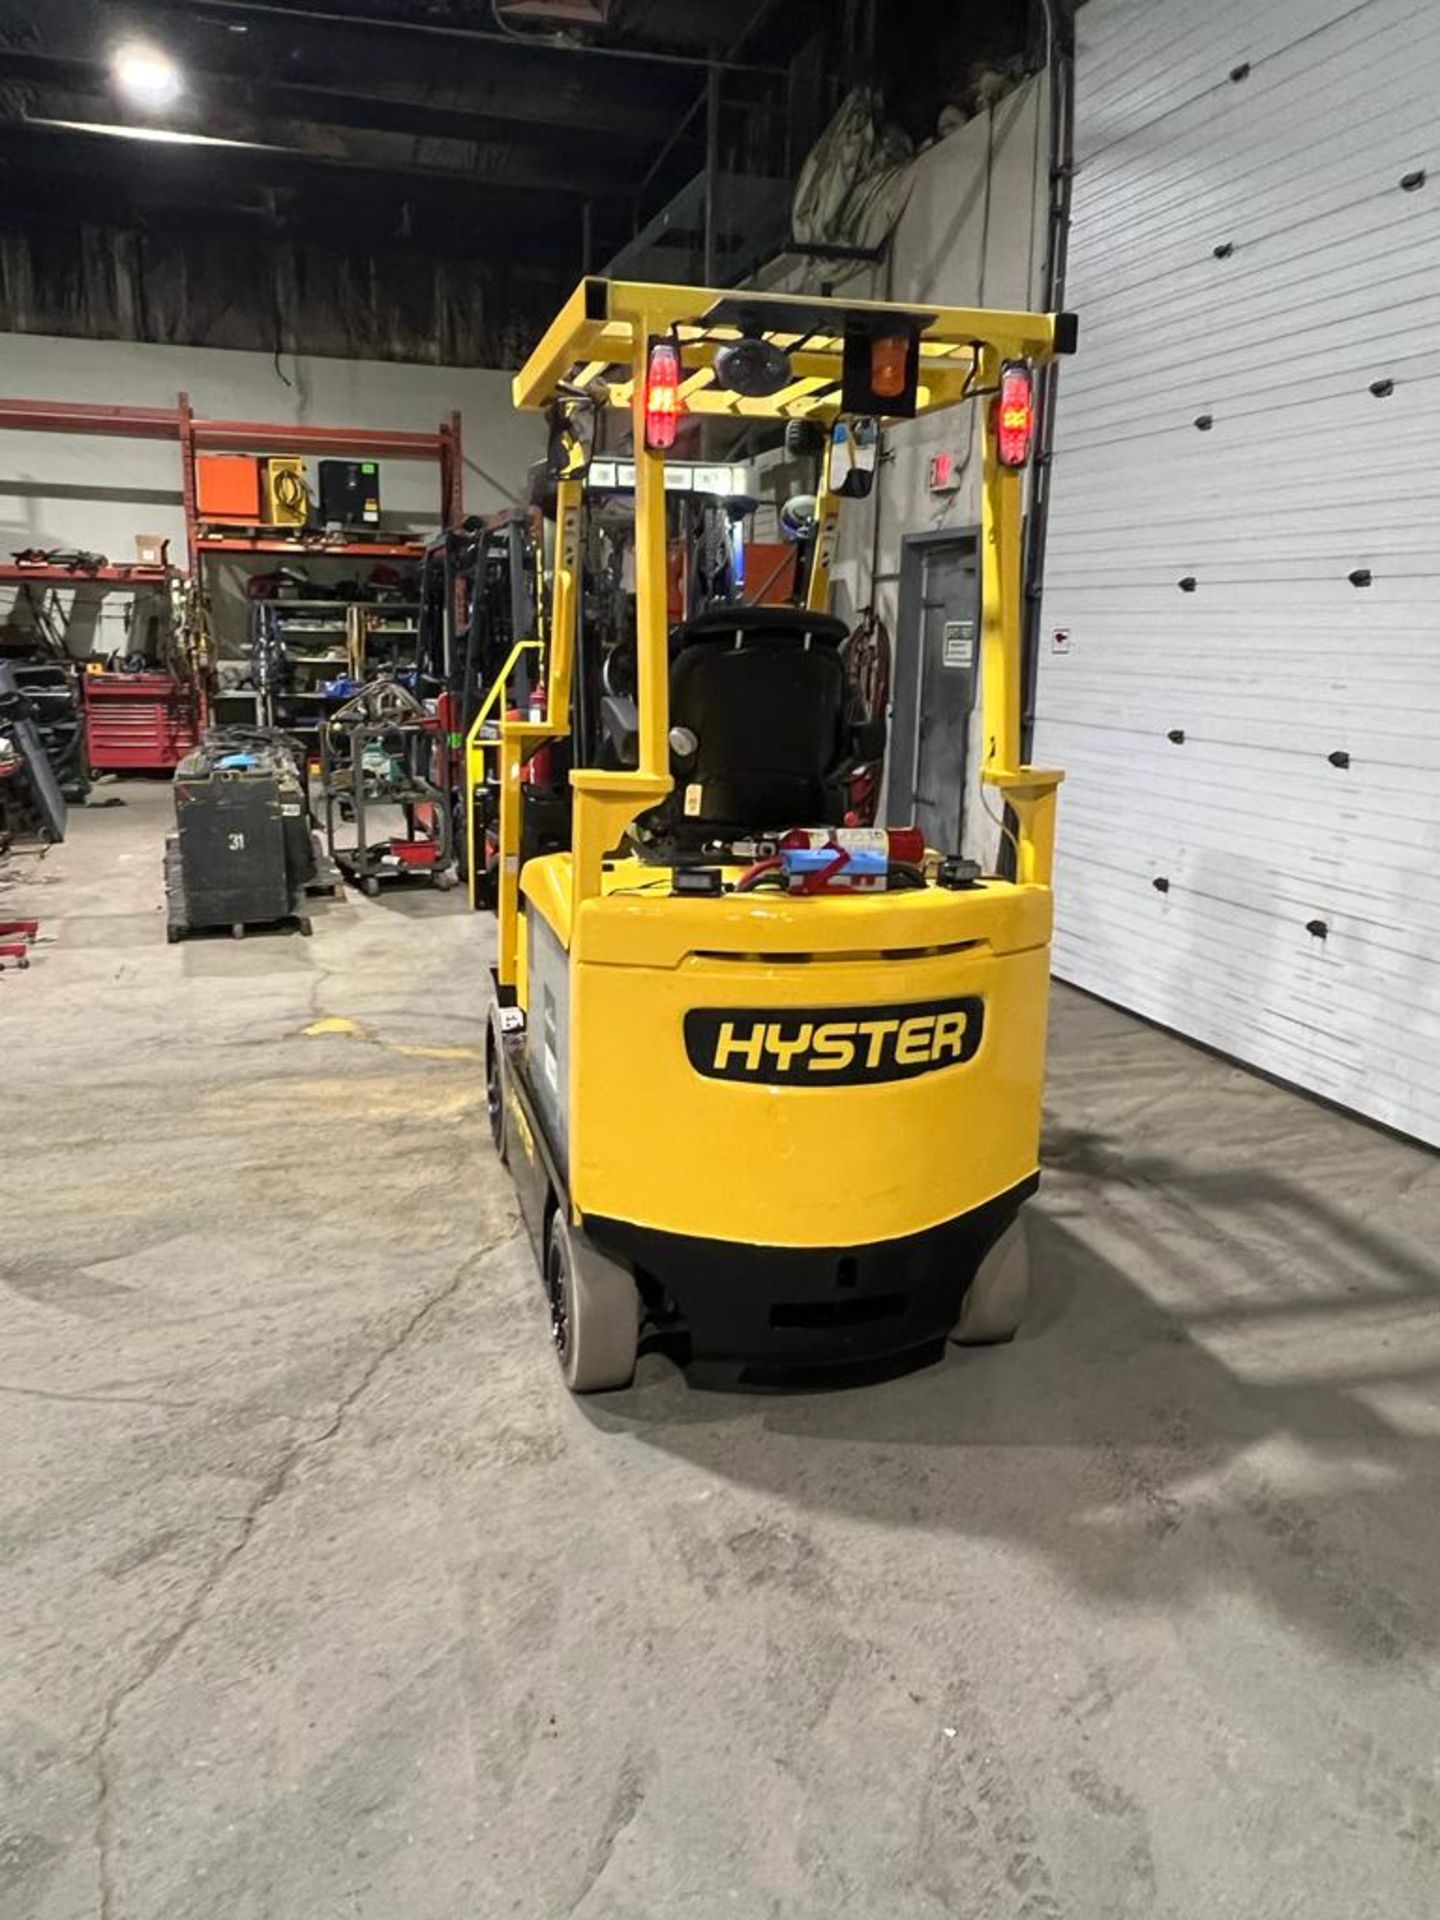 NICE 2015 Hyster model 50 - 5,000lbs Capacity Forklift Electric with Sideshift - 3-stage mast - Image 5 of 5